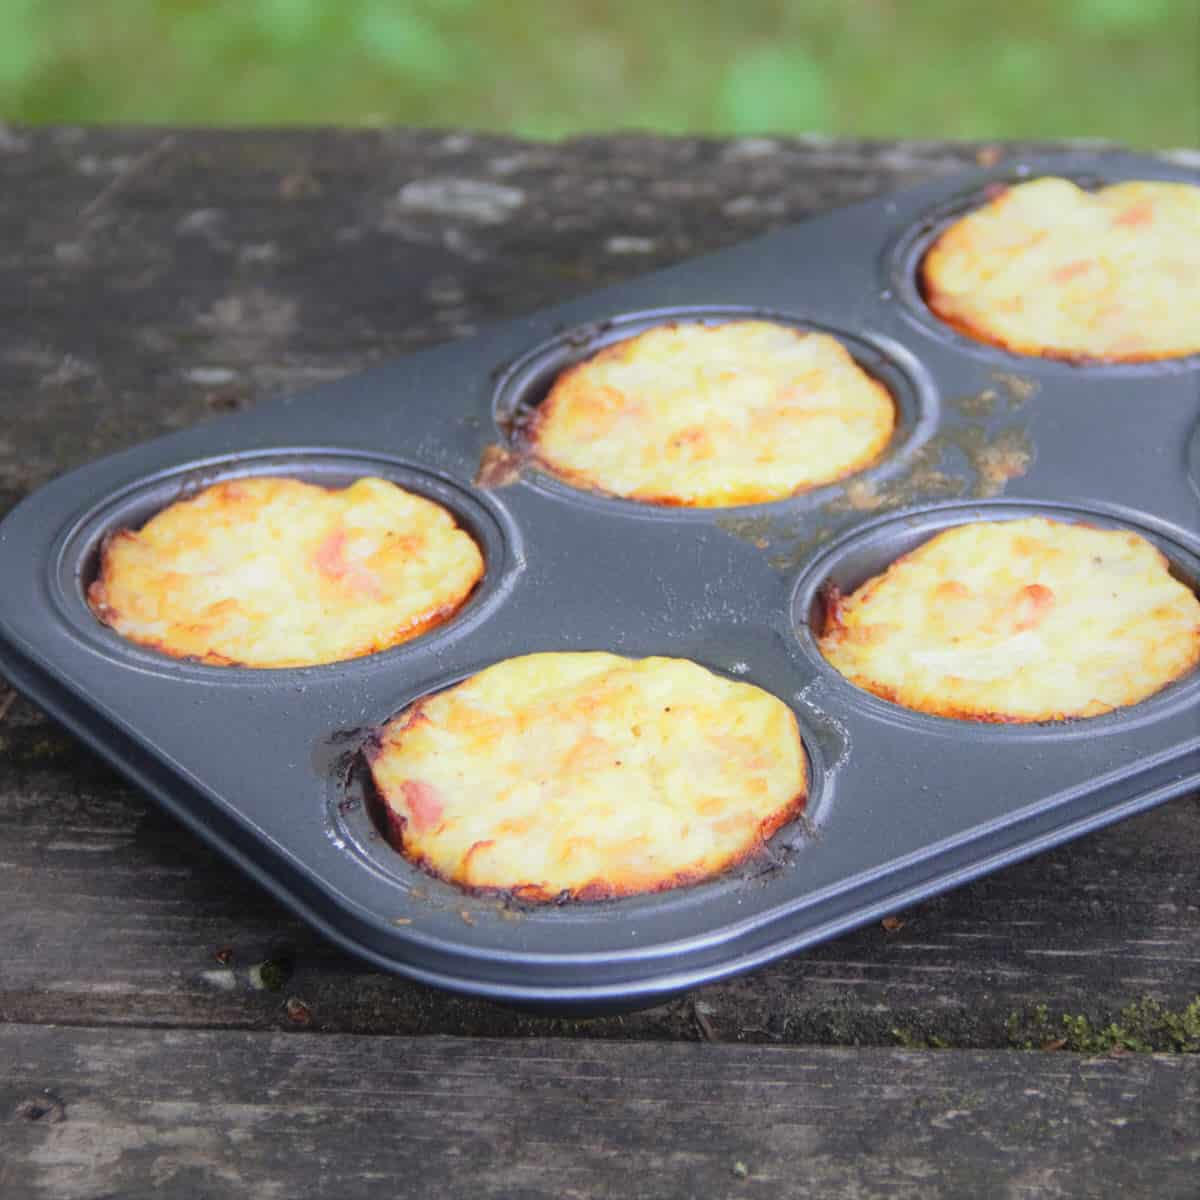 https://bushcooking.com/wp-content/uploads/2017/02/Mini-Bacon-and-Egg-Pies-3a.jpg